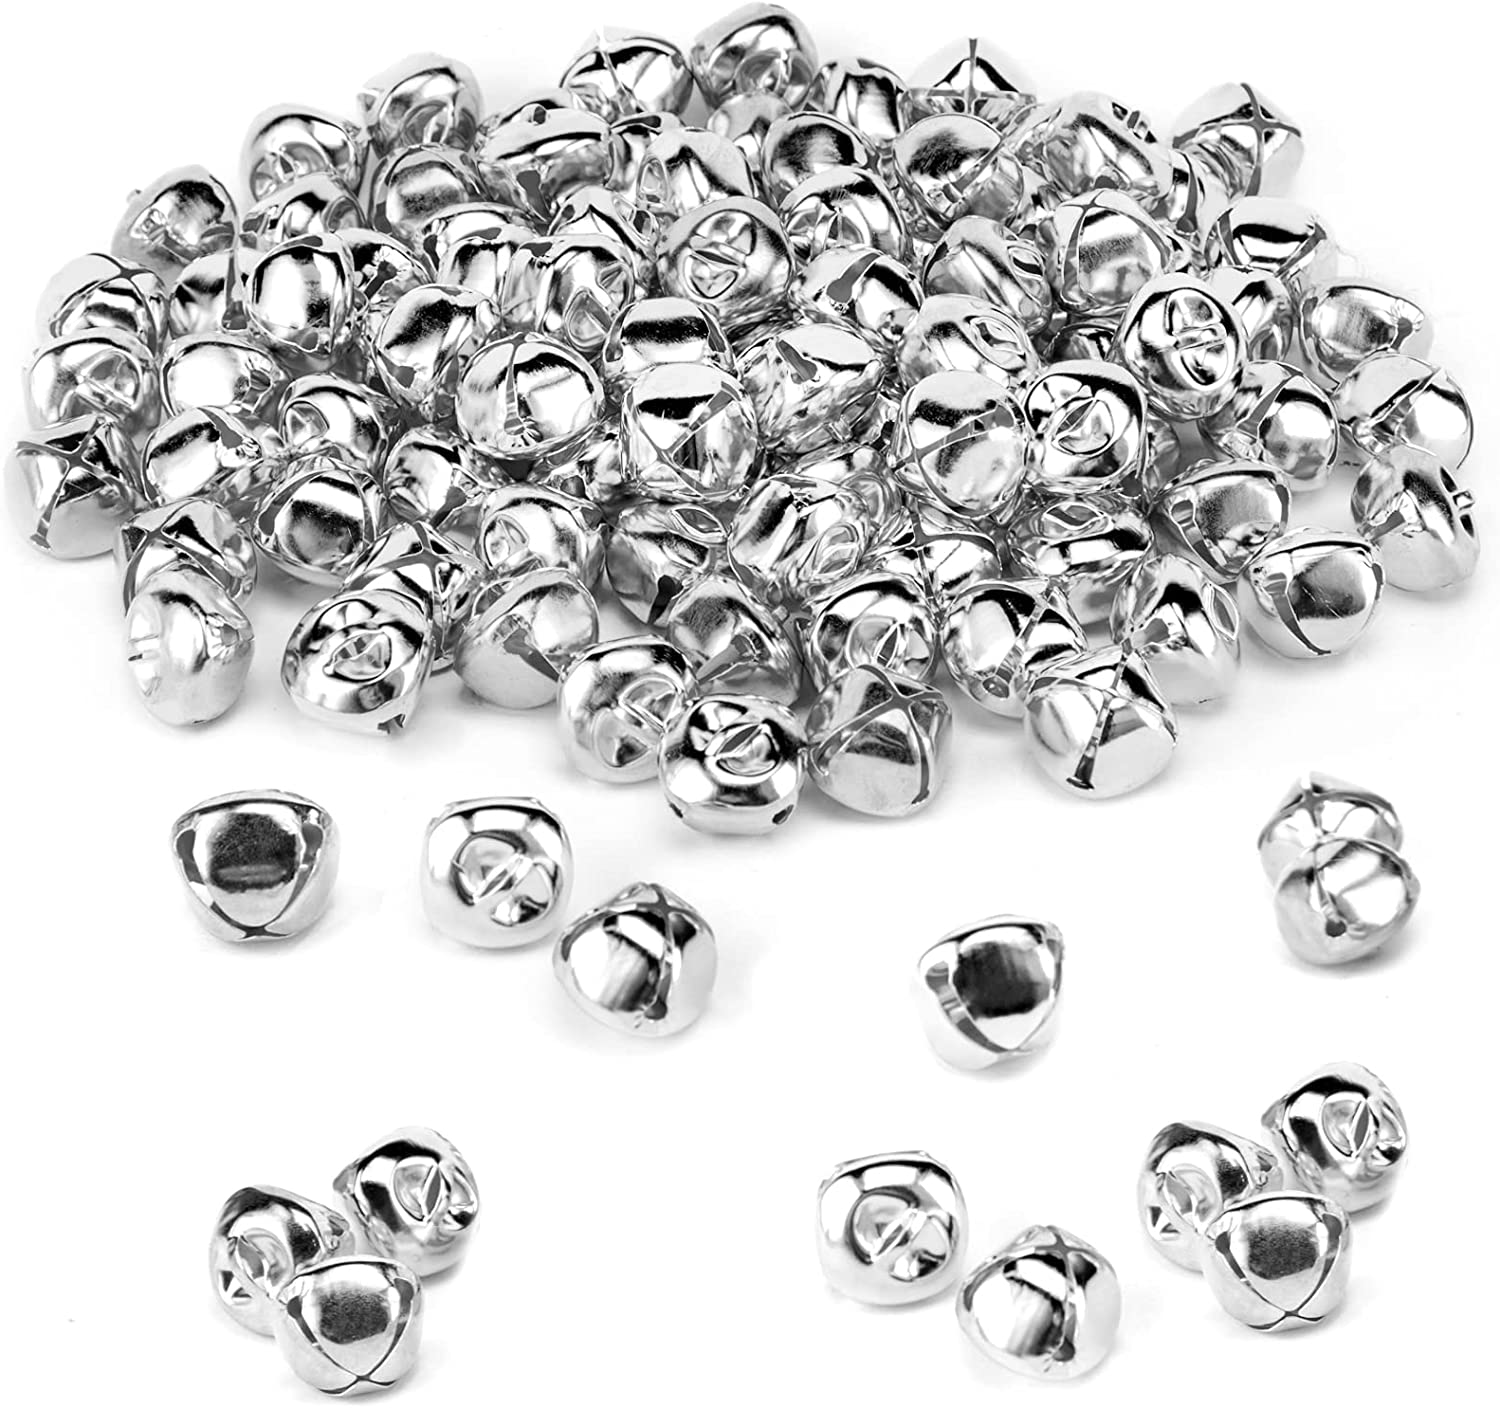 Jingle Bells, 1/2(12mm) 120 Pack Small Bells for Crafts DIY Christmas,  Silver Tone 